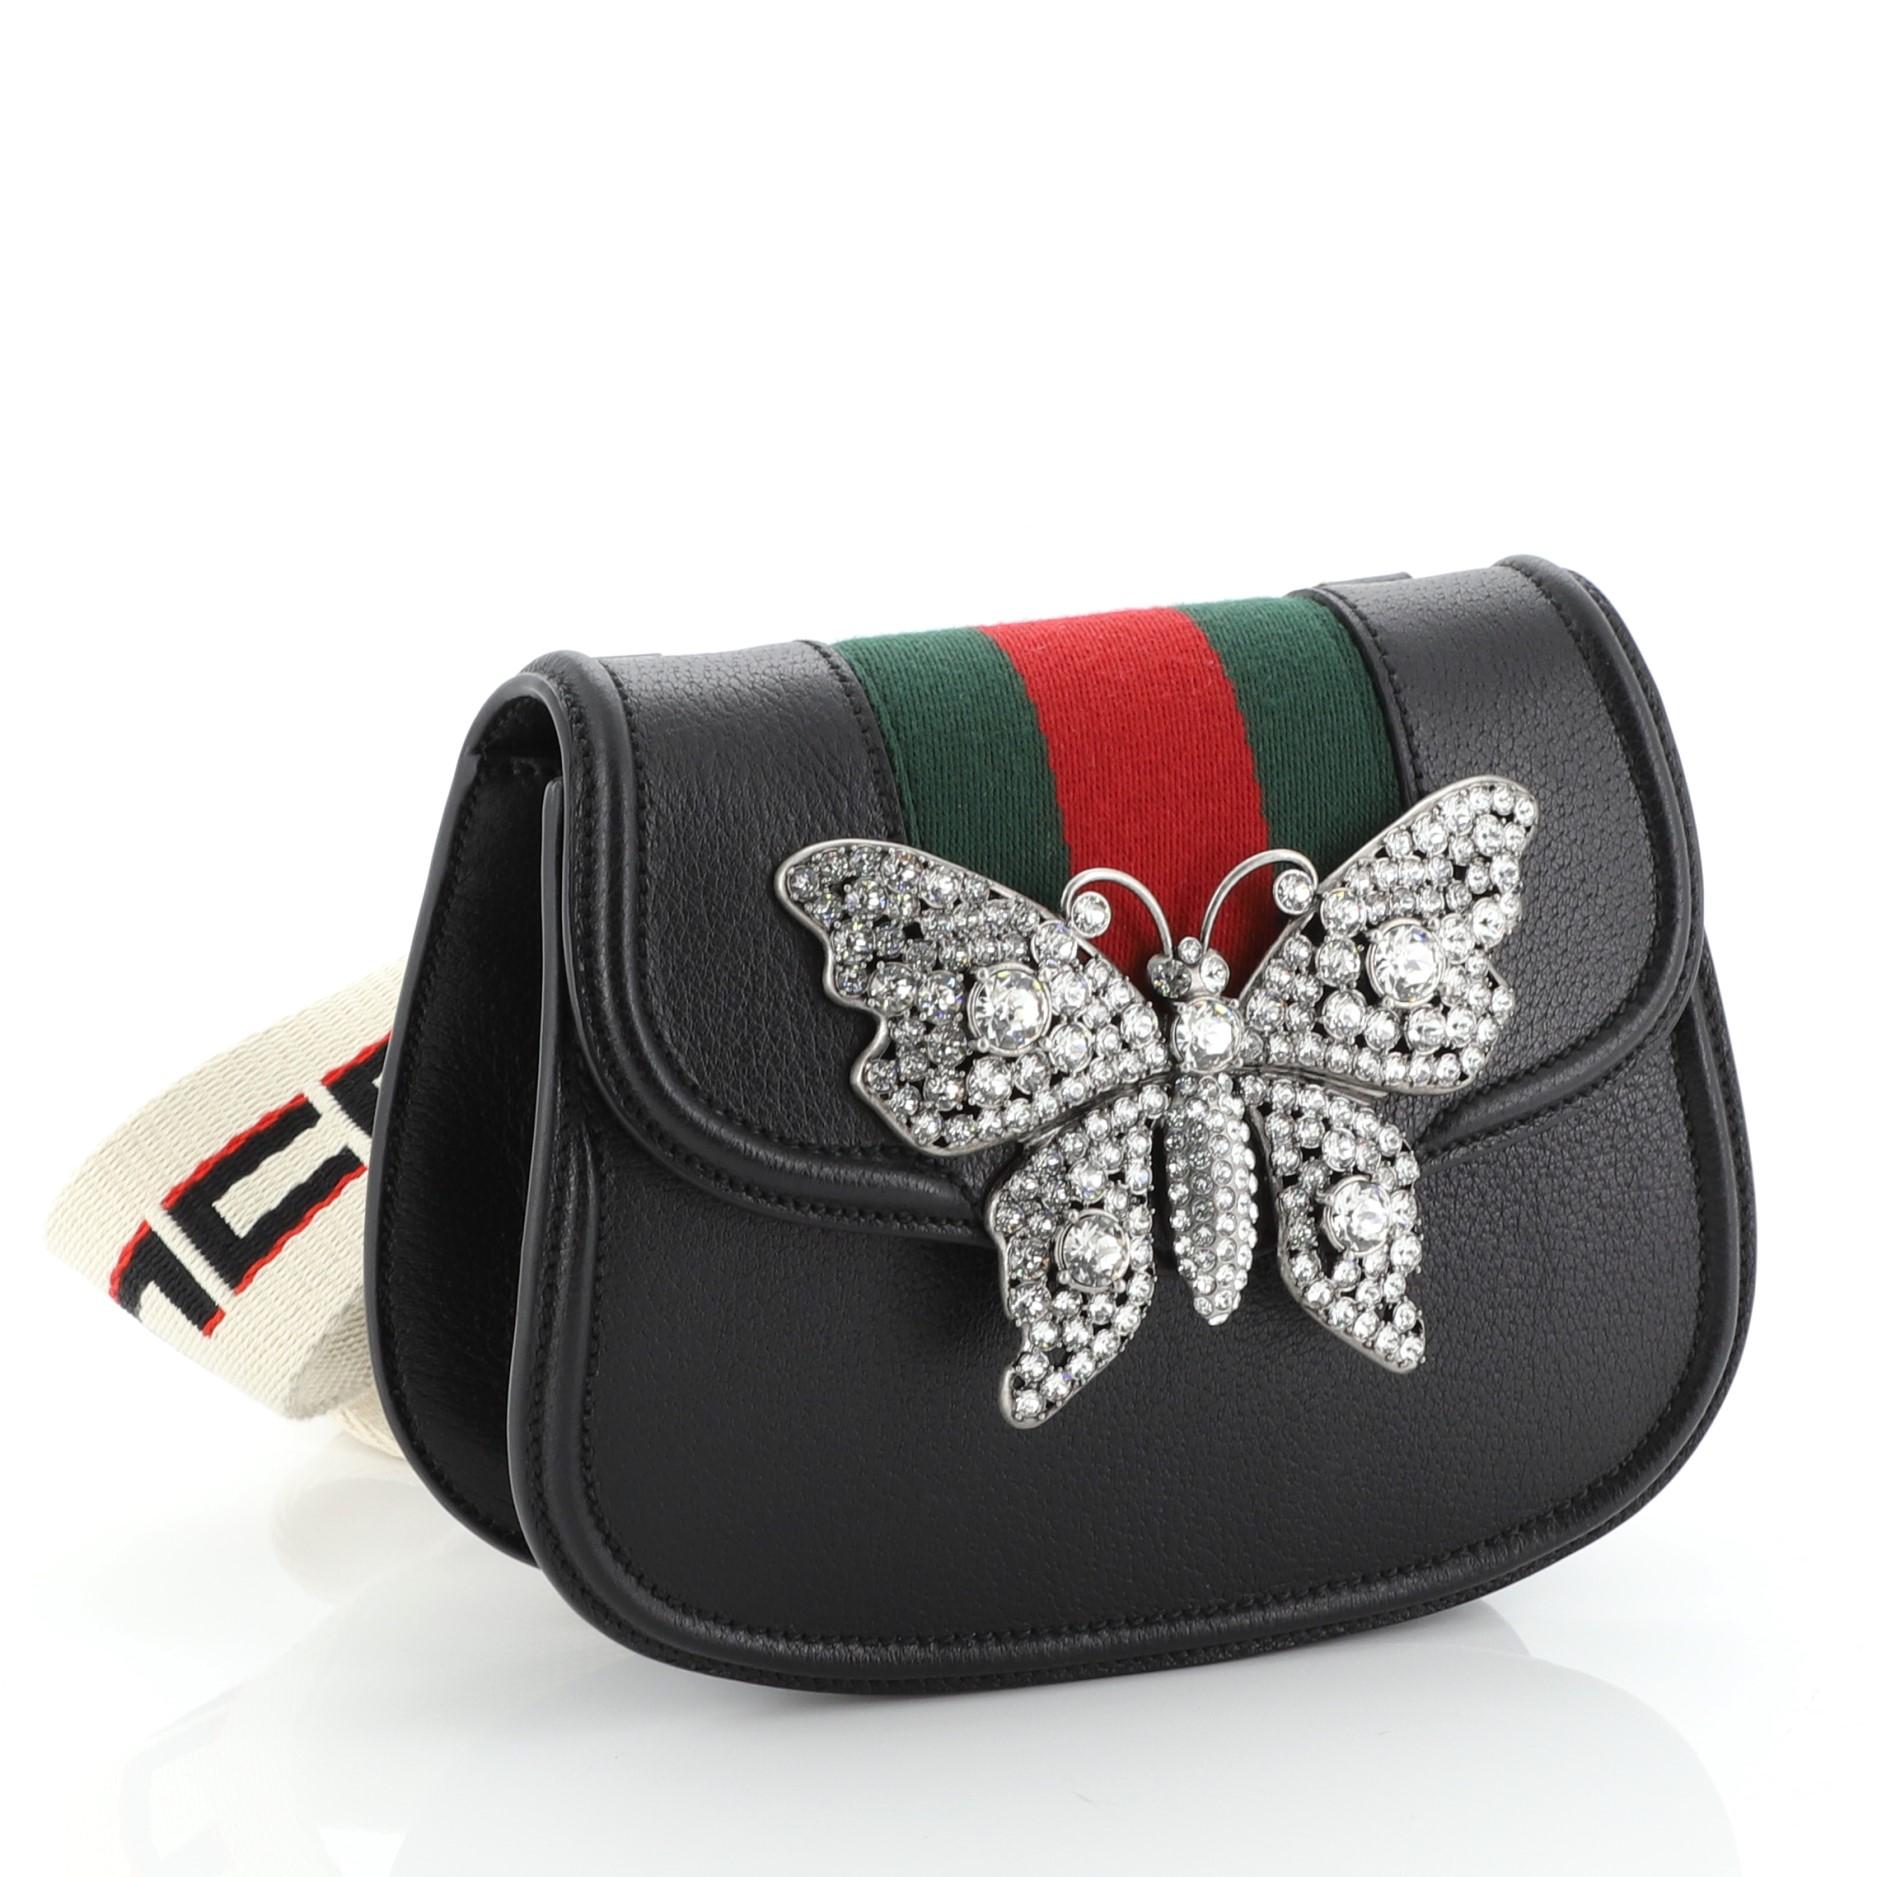 This Gucci Totem Shoulder Bag Leather Small, crafted in black leather, features a detachable shoulder strap, front flap with enameled metal butterfly ornament, web detailing and aged gold and silver-tone hardware. Its magnetic closure opens to a